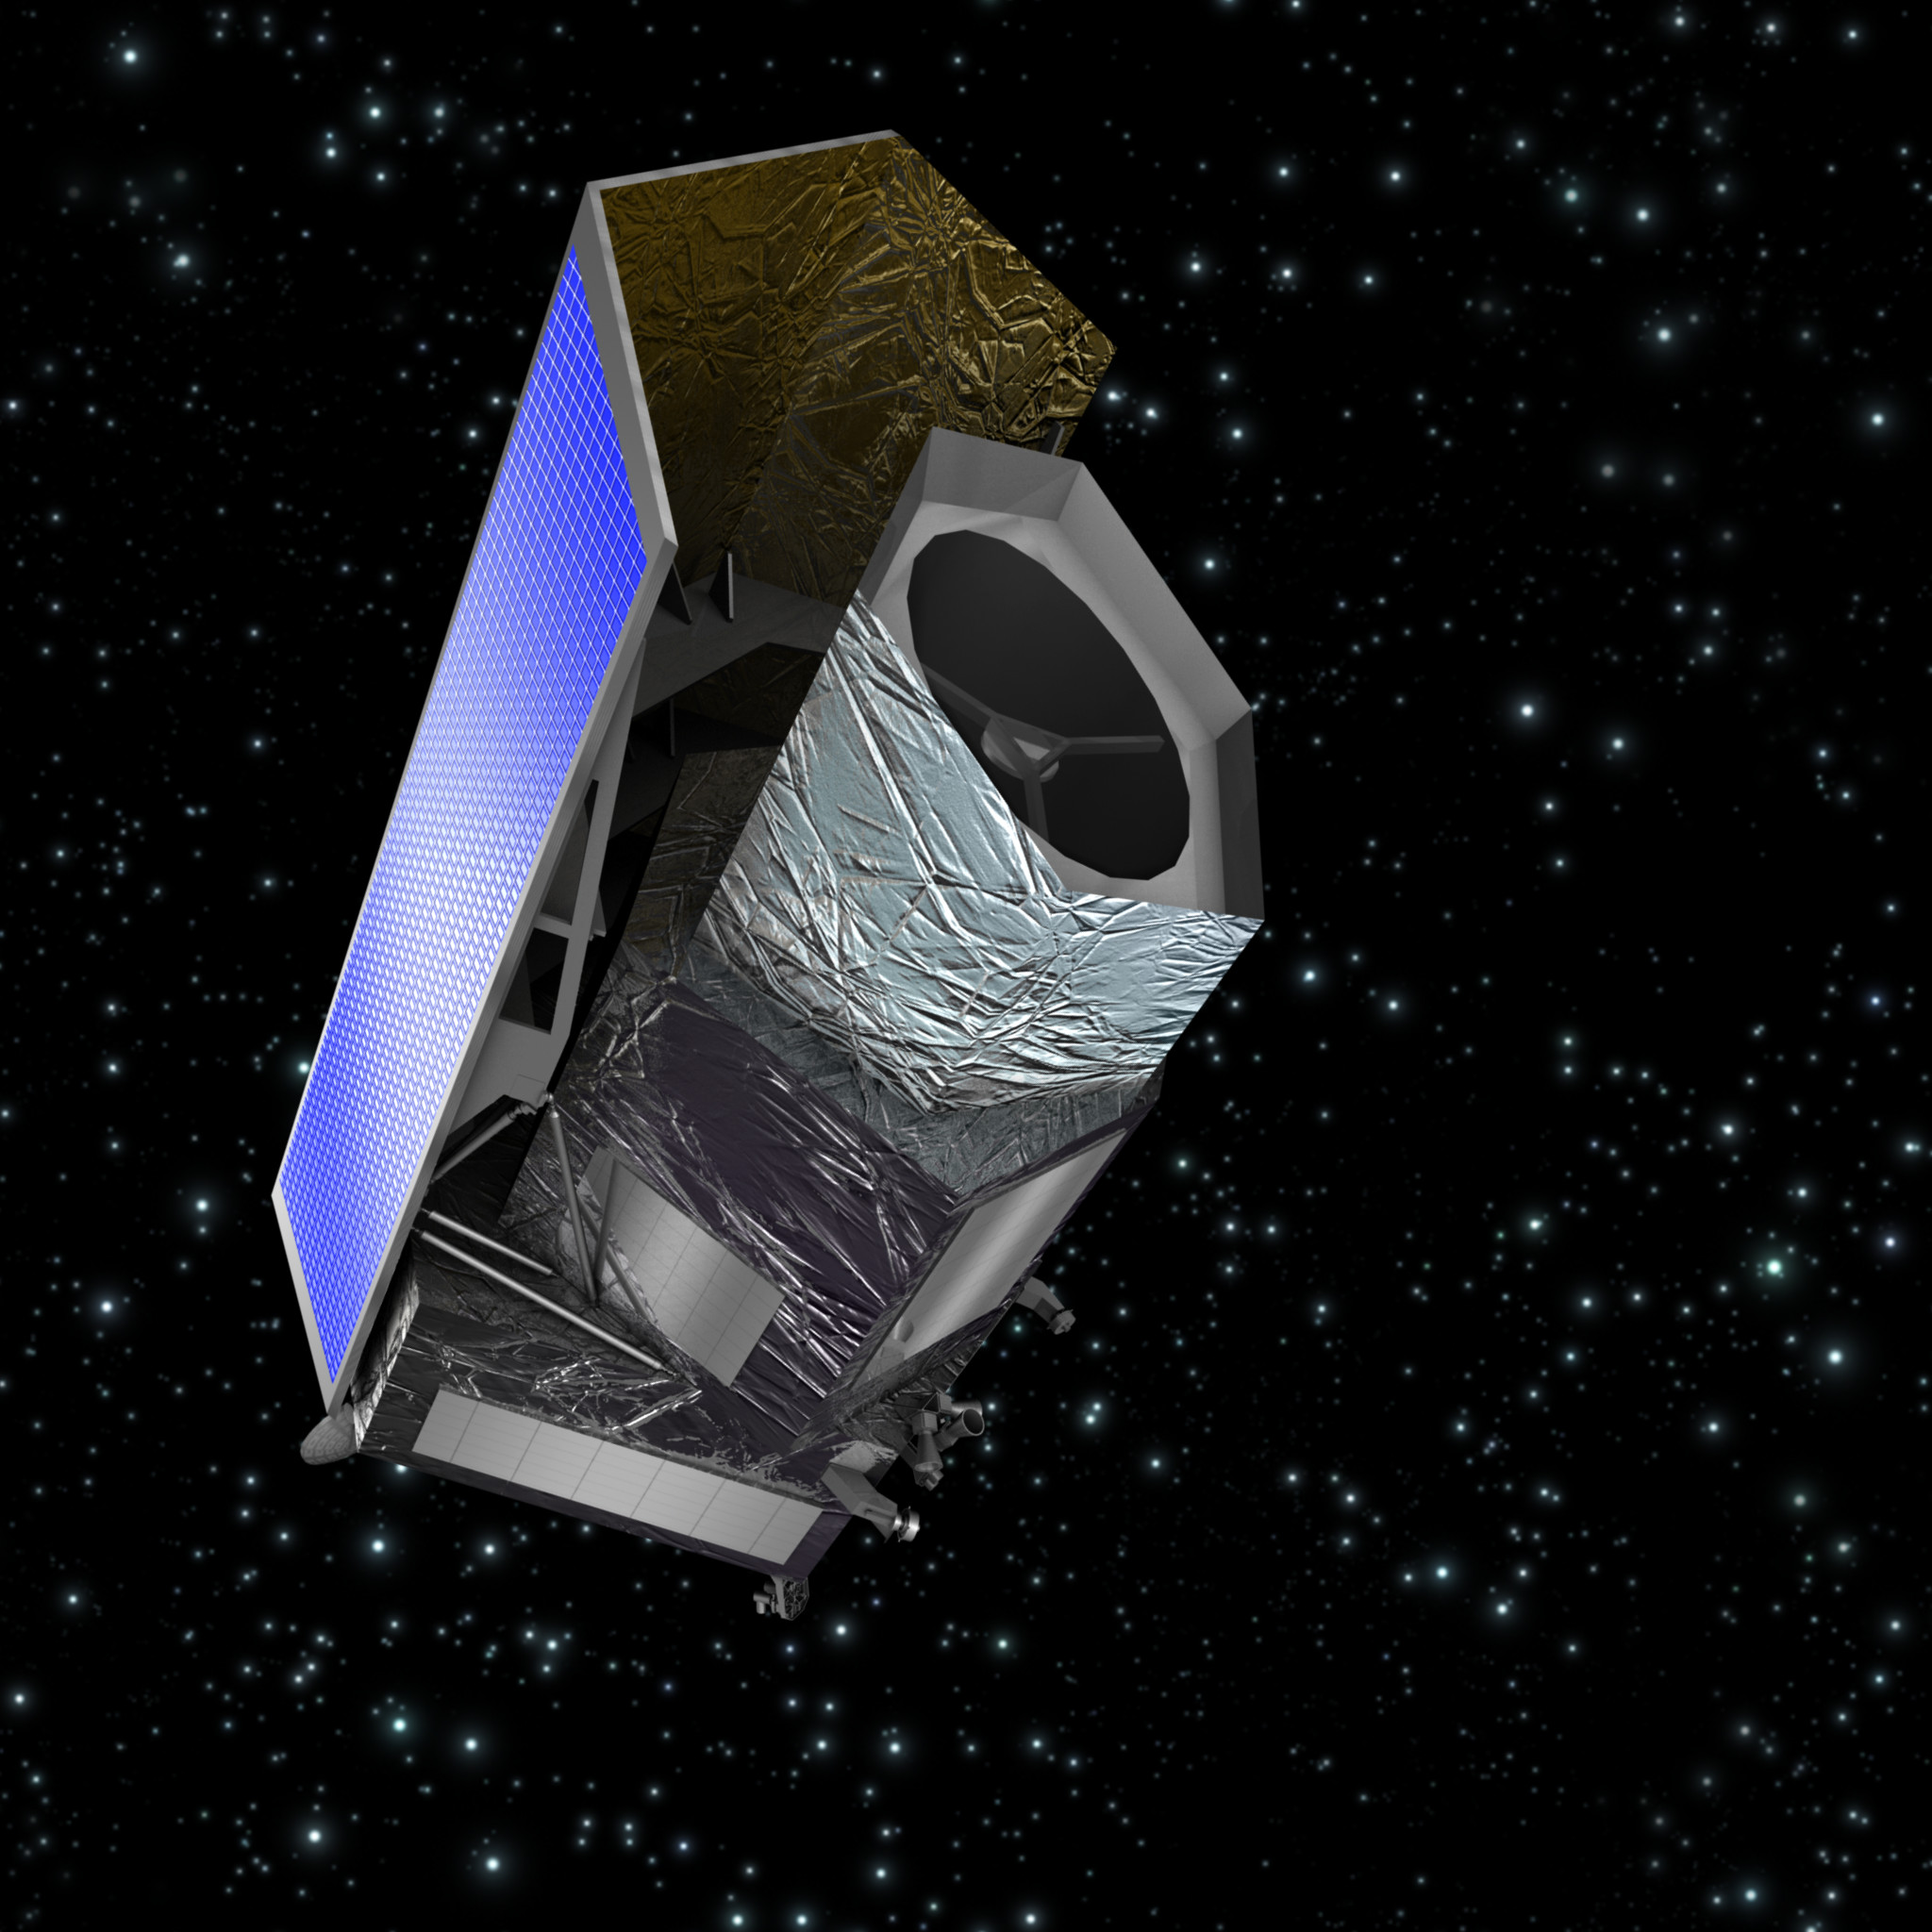 A roughly cylindrical spacecraft floats against a starry backdrop. The spacecraft is partly enclosed by solar panels topped with bright blue cells, and is wrapped in silver foil.